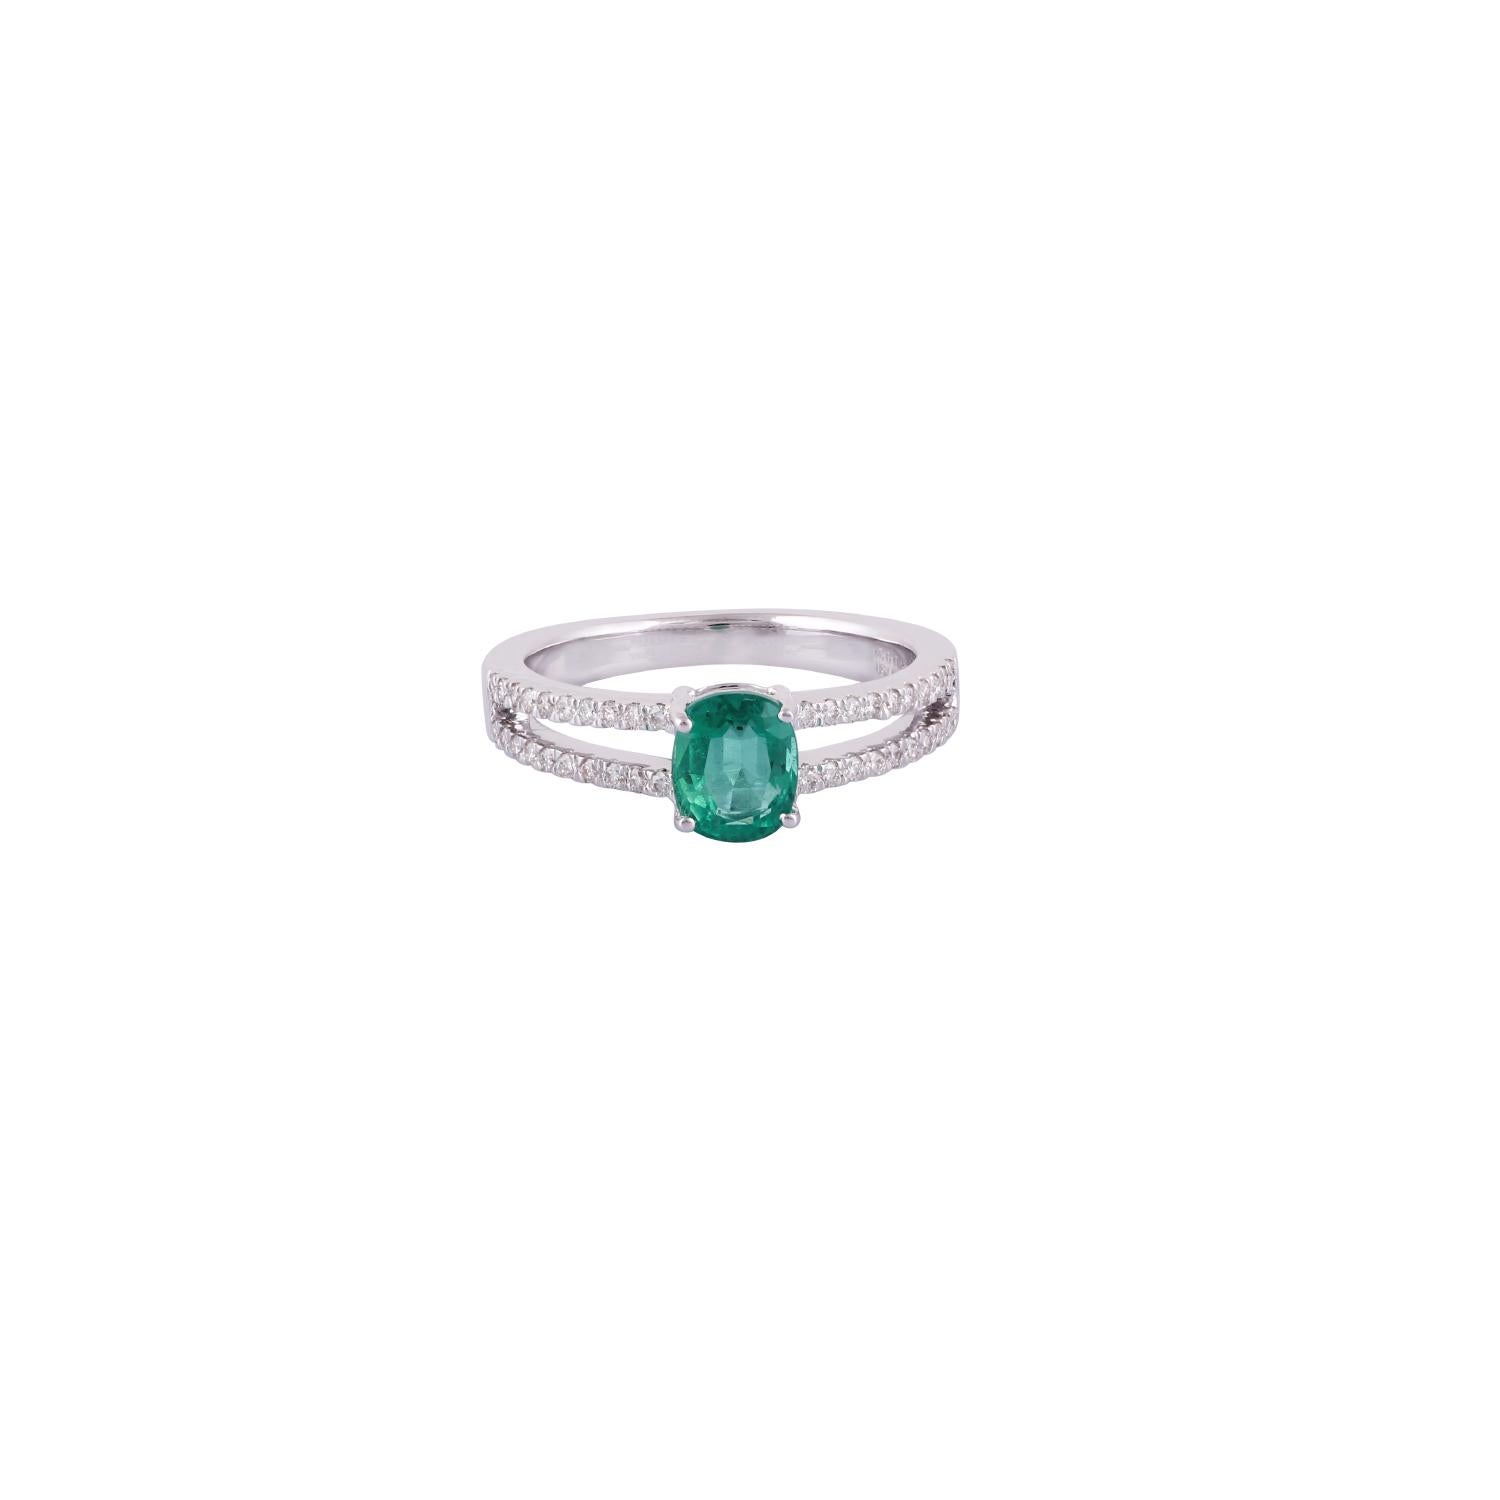 This is an elegant emerald & diamond ring studded in 18k White gold with 1 piece of  Zambian emerald weight 0.92 carat which is surrounded by 40 pieces of diamonds weight 0.24 carat, this entire ring studded in 18k White  gold.



 Ring size can be